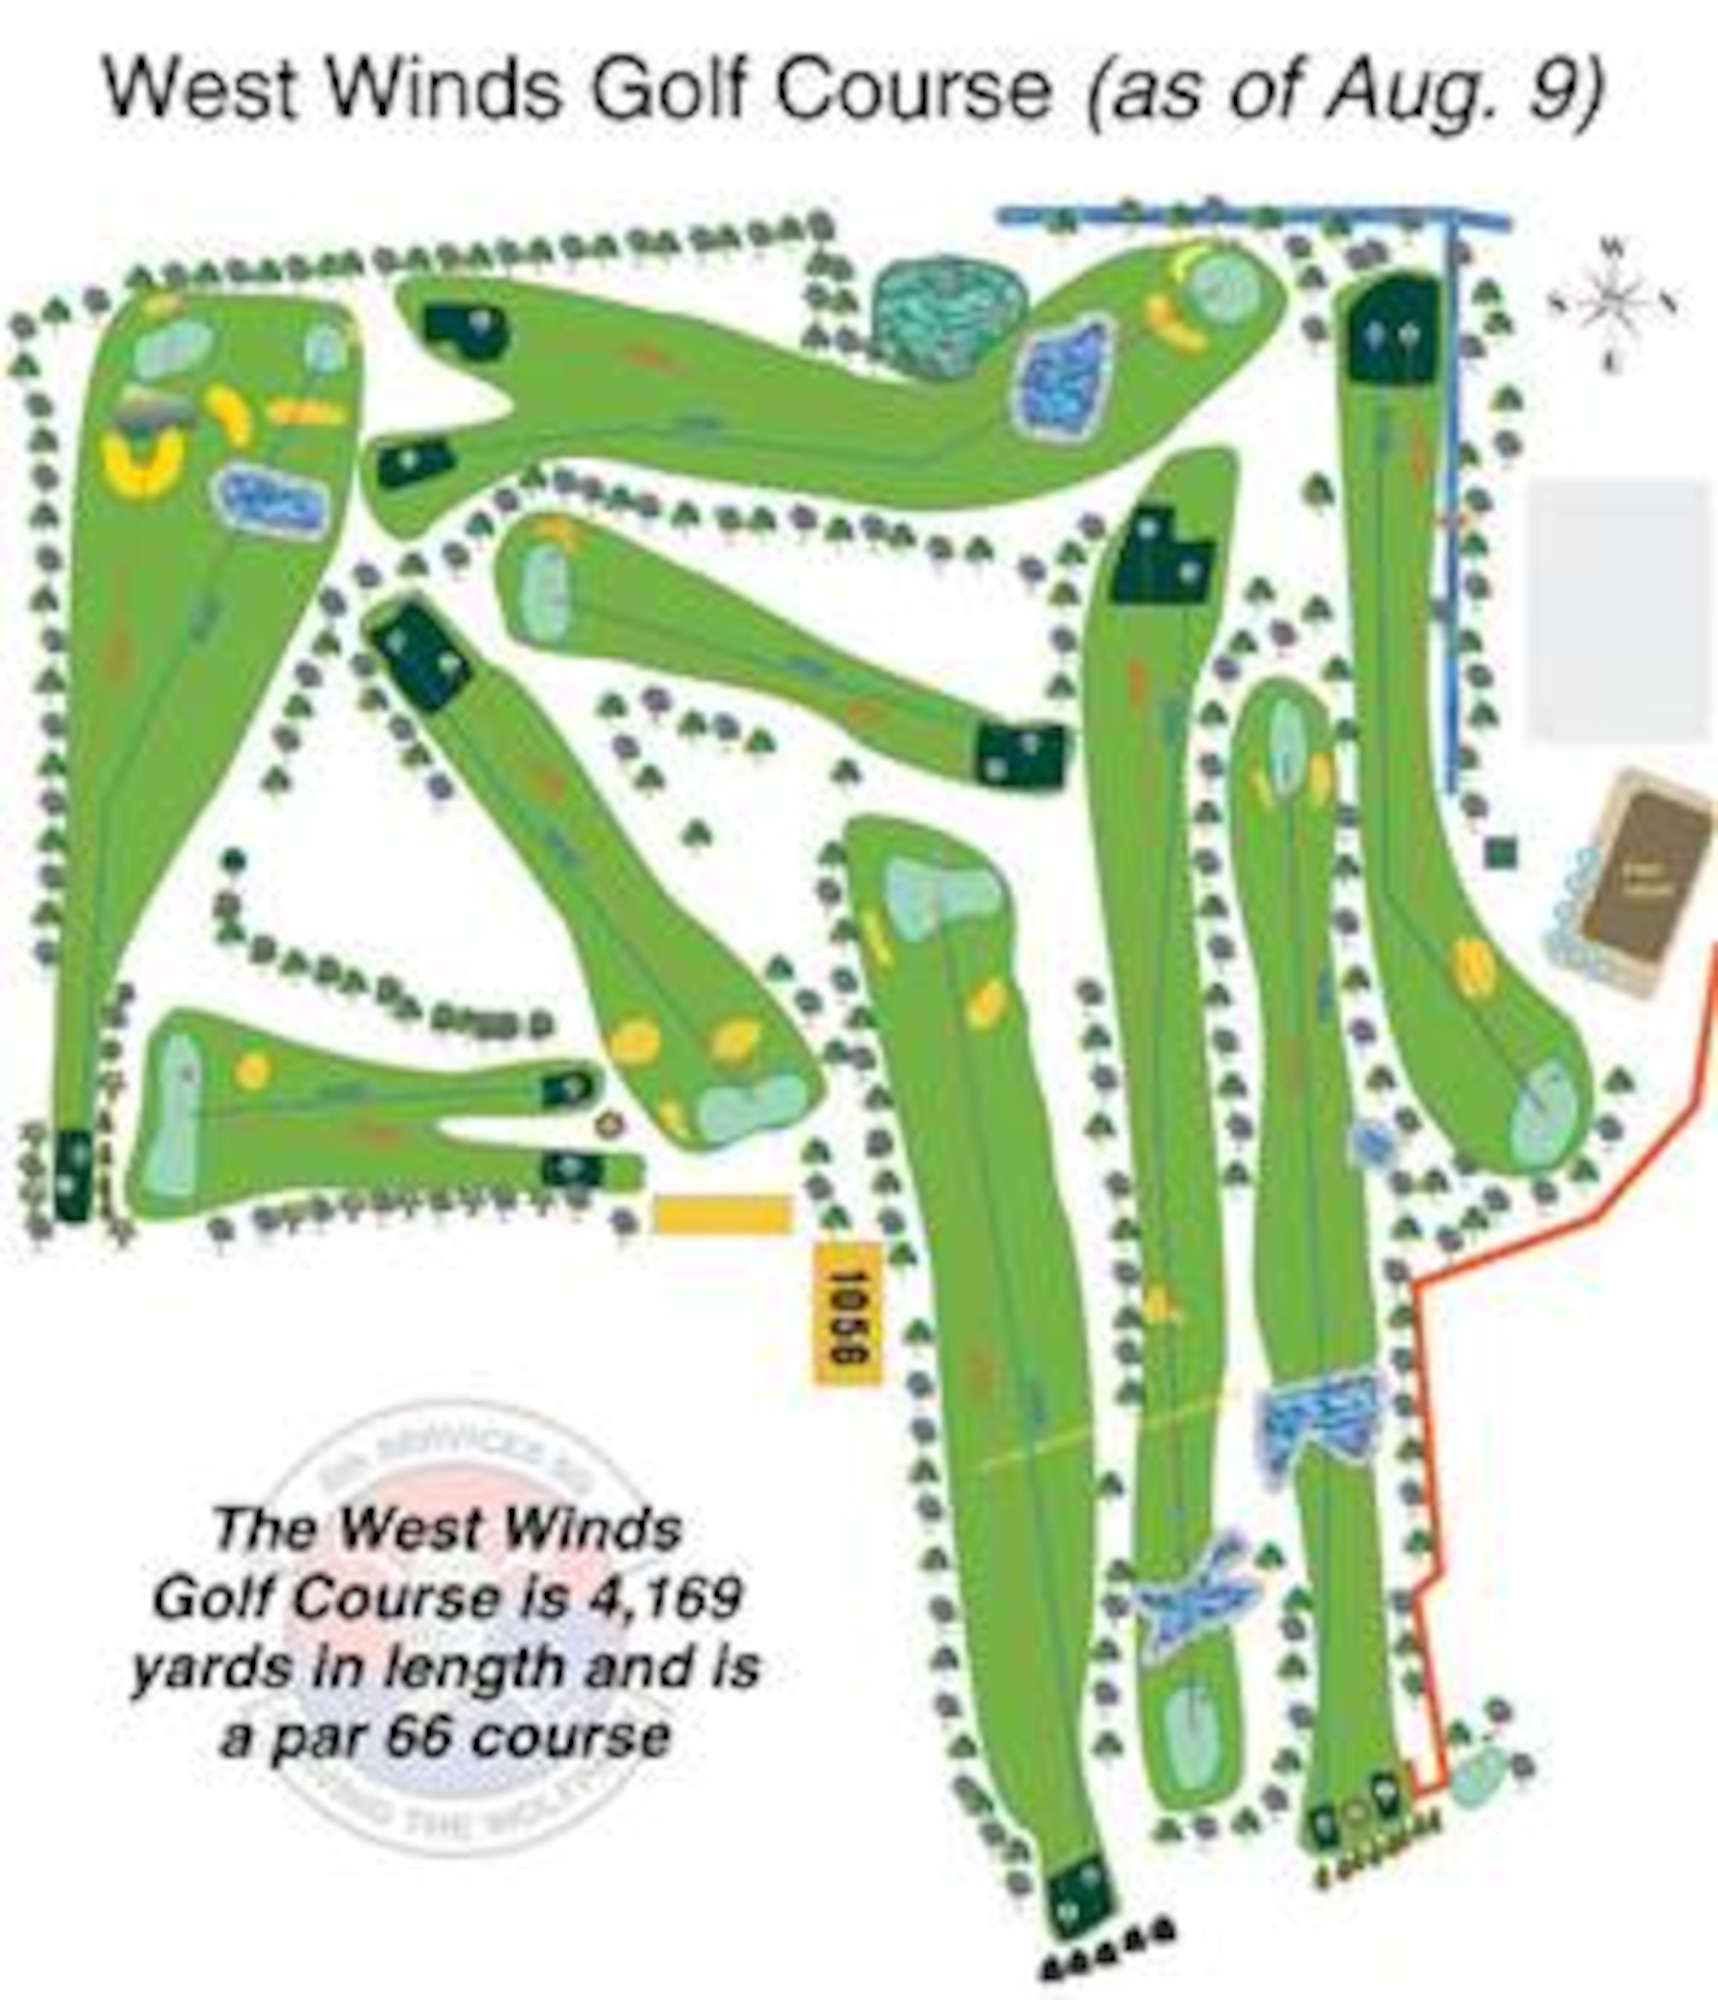 The West Winds Golf Course at Kunsan Air Base, South Korea as of Aug. 9.  (U.S Air Force graphic/8th Services Squadron)